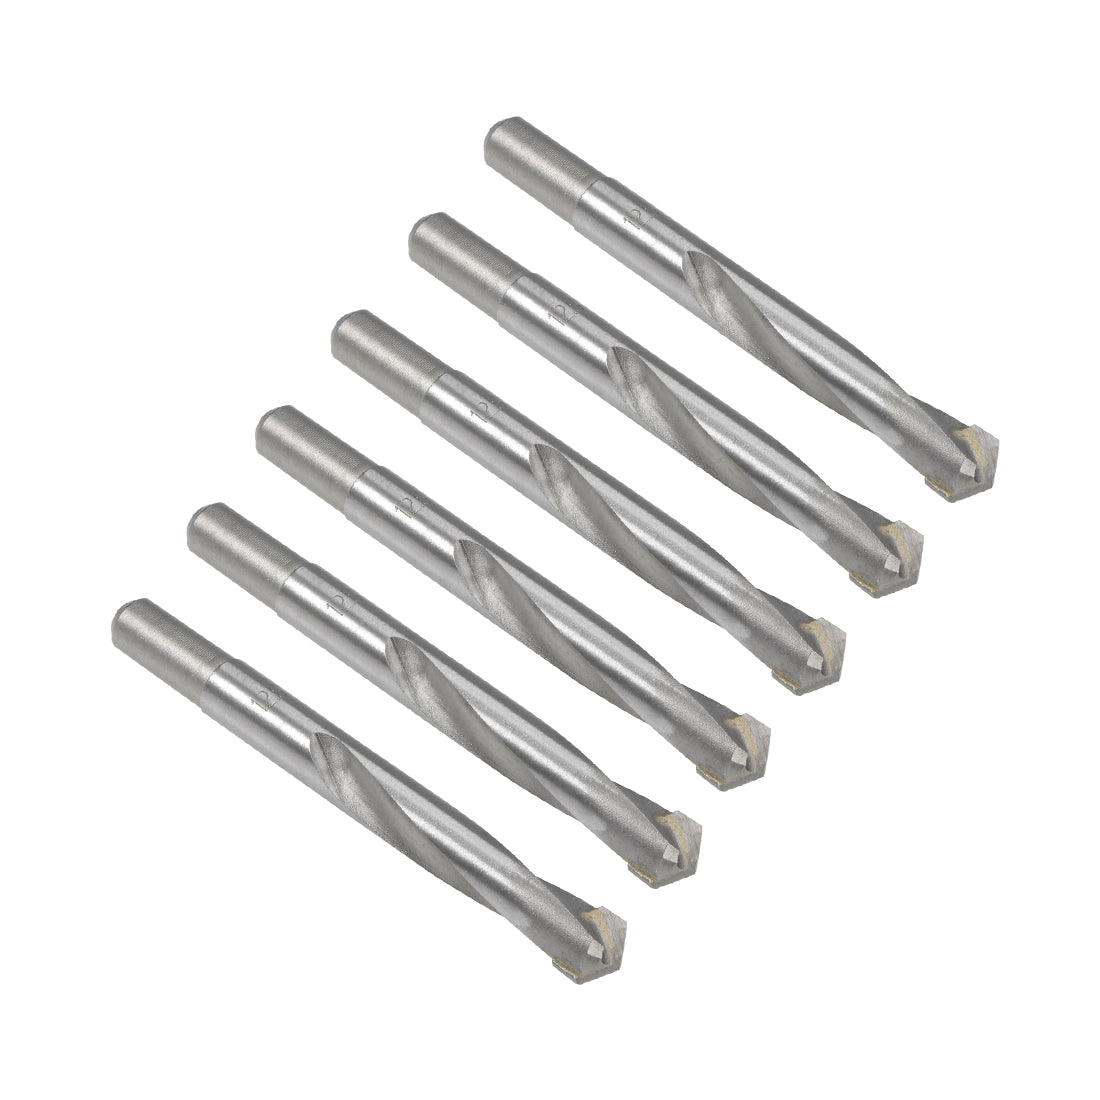 uxcell Uxcell 12.5mm Cemented Carbide Twist Drill Bit for Stainless Steel Copper Aluminum 6Pcs